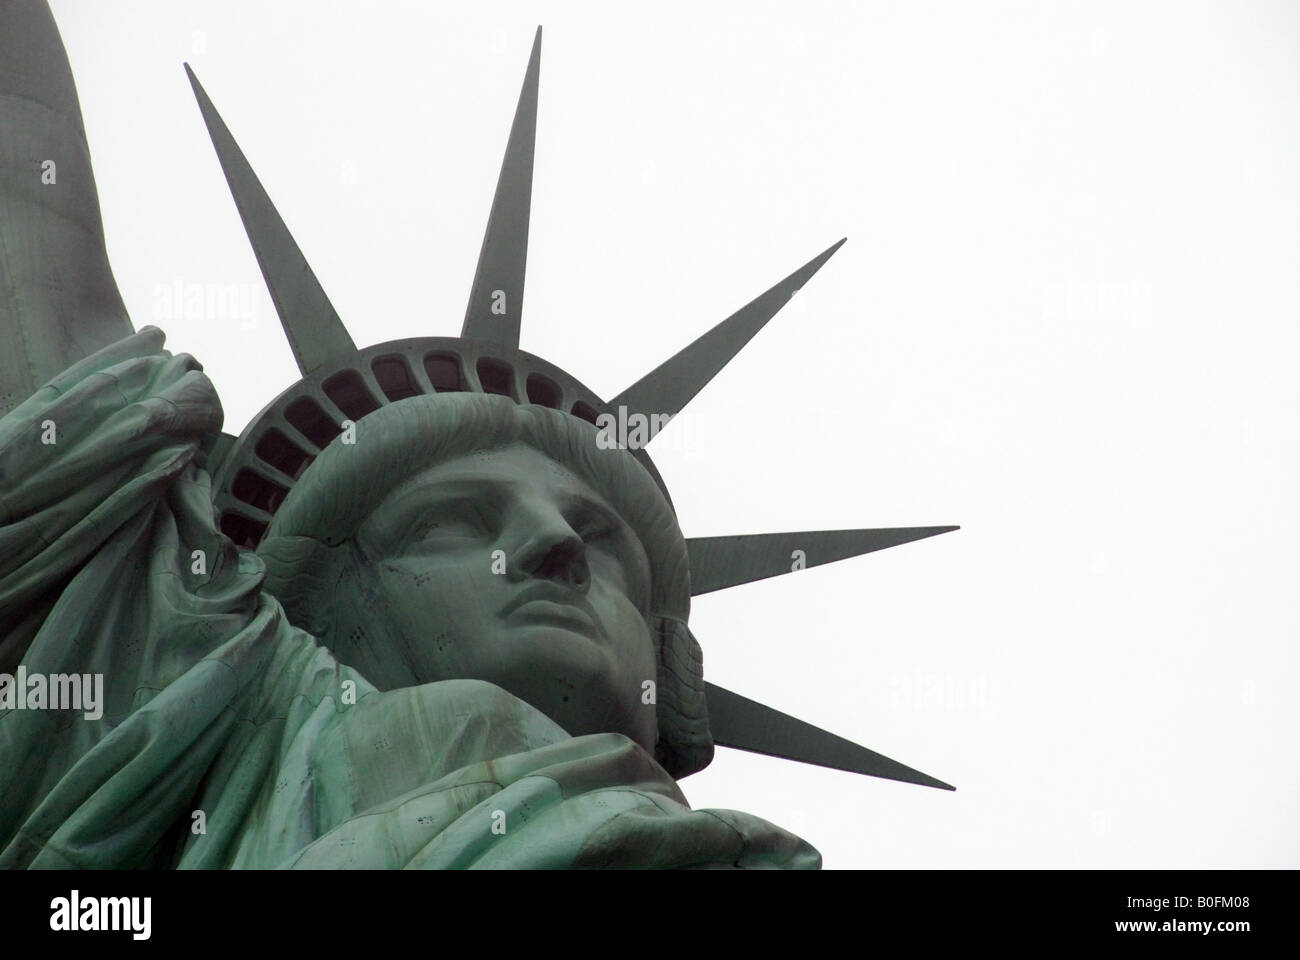 Close-up of the Statue of Liberty, with balance of white and statue. Stock Photo